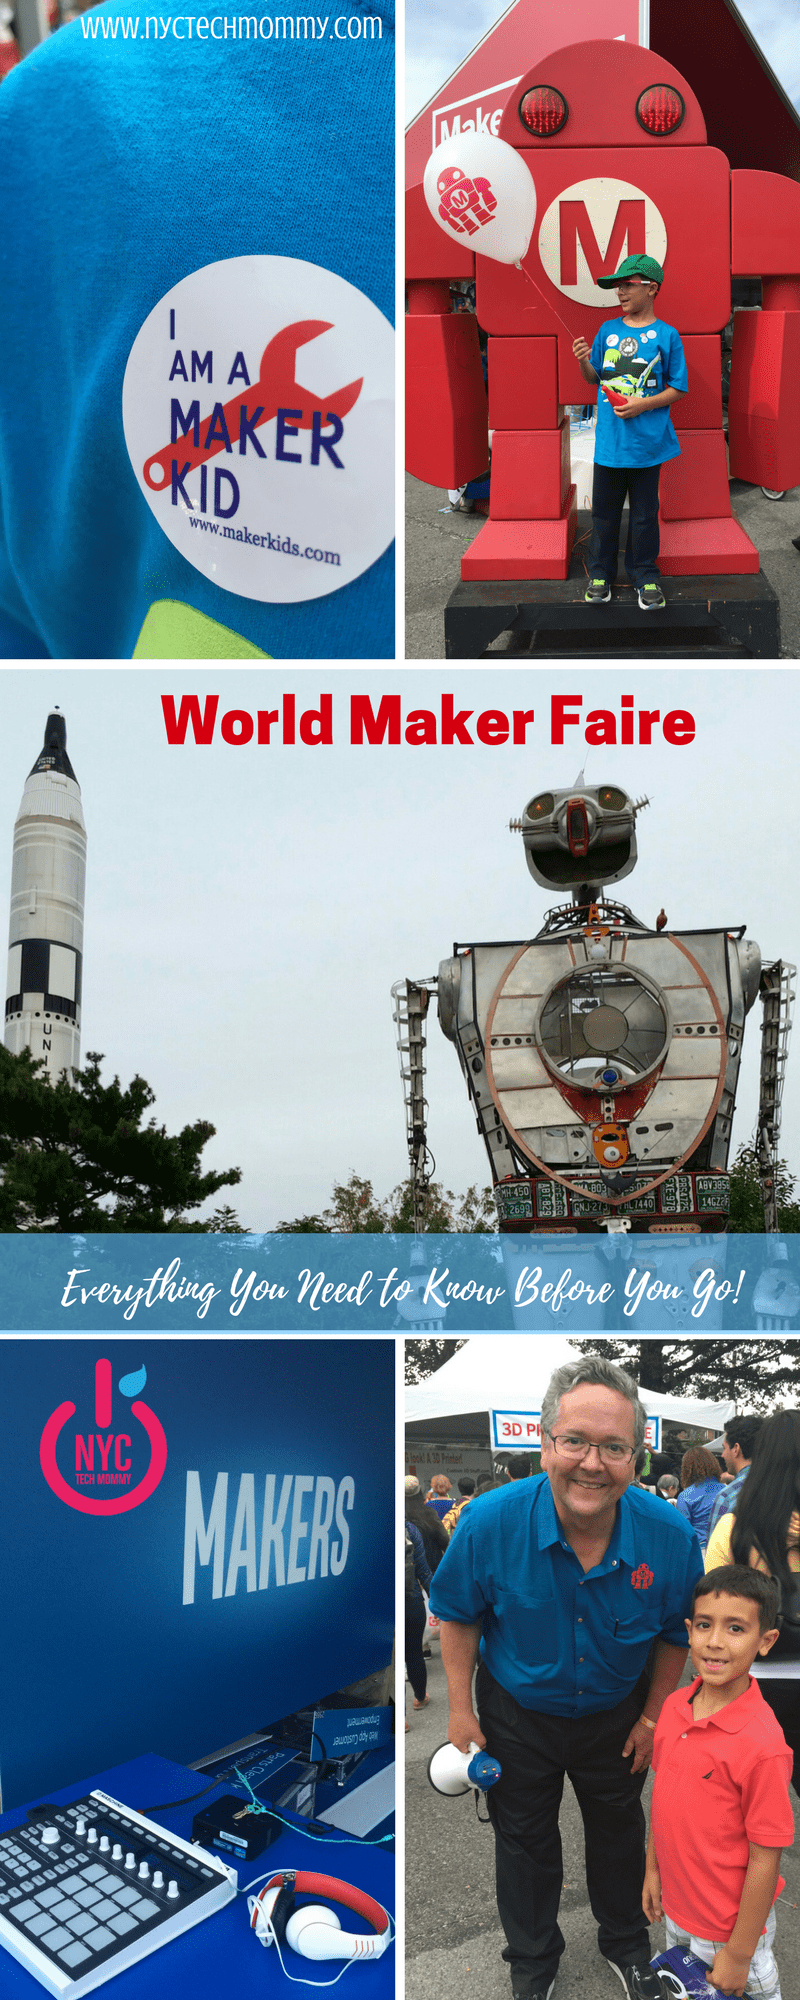 #MakerFaire - World Maker Faire everything you need to go before you go - from what it is to what you'll see and even what to eat. It's all here! #Makers #MFNY17